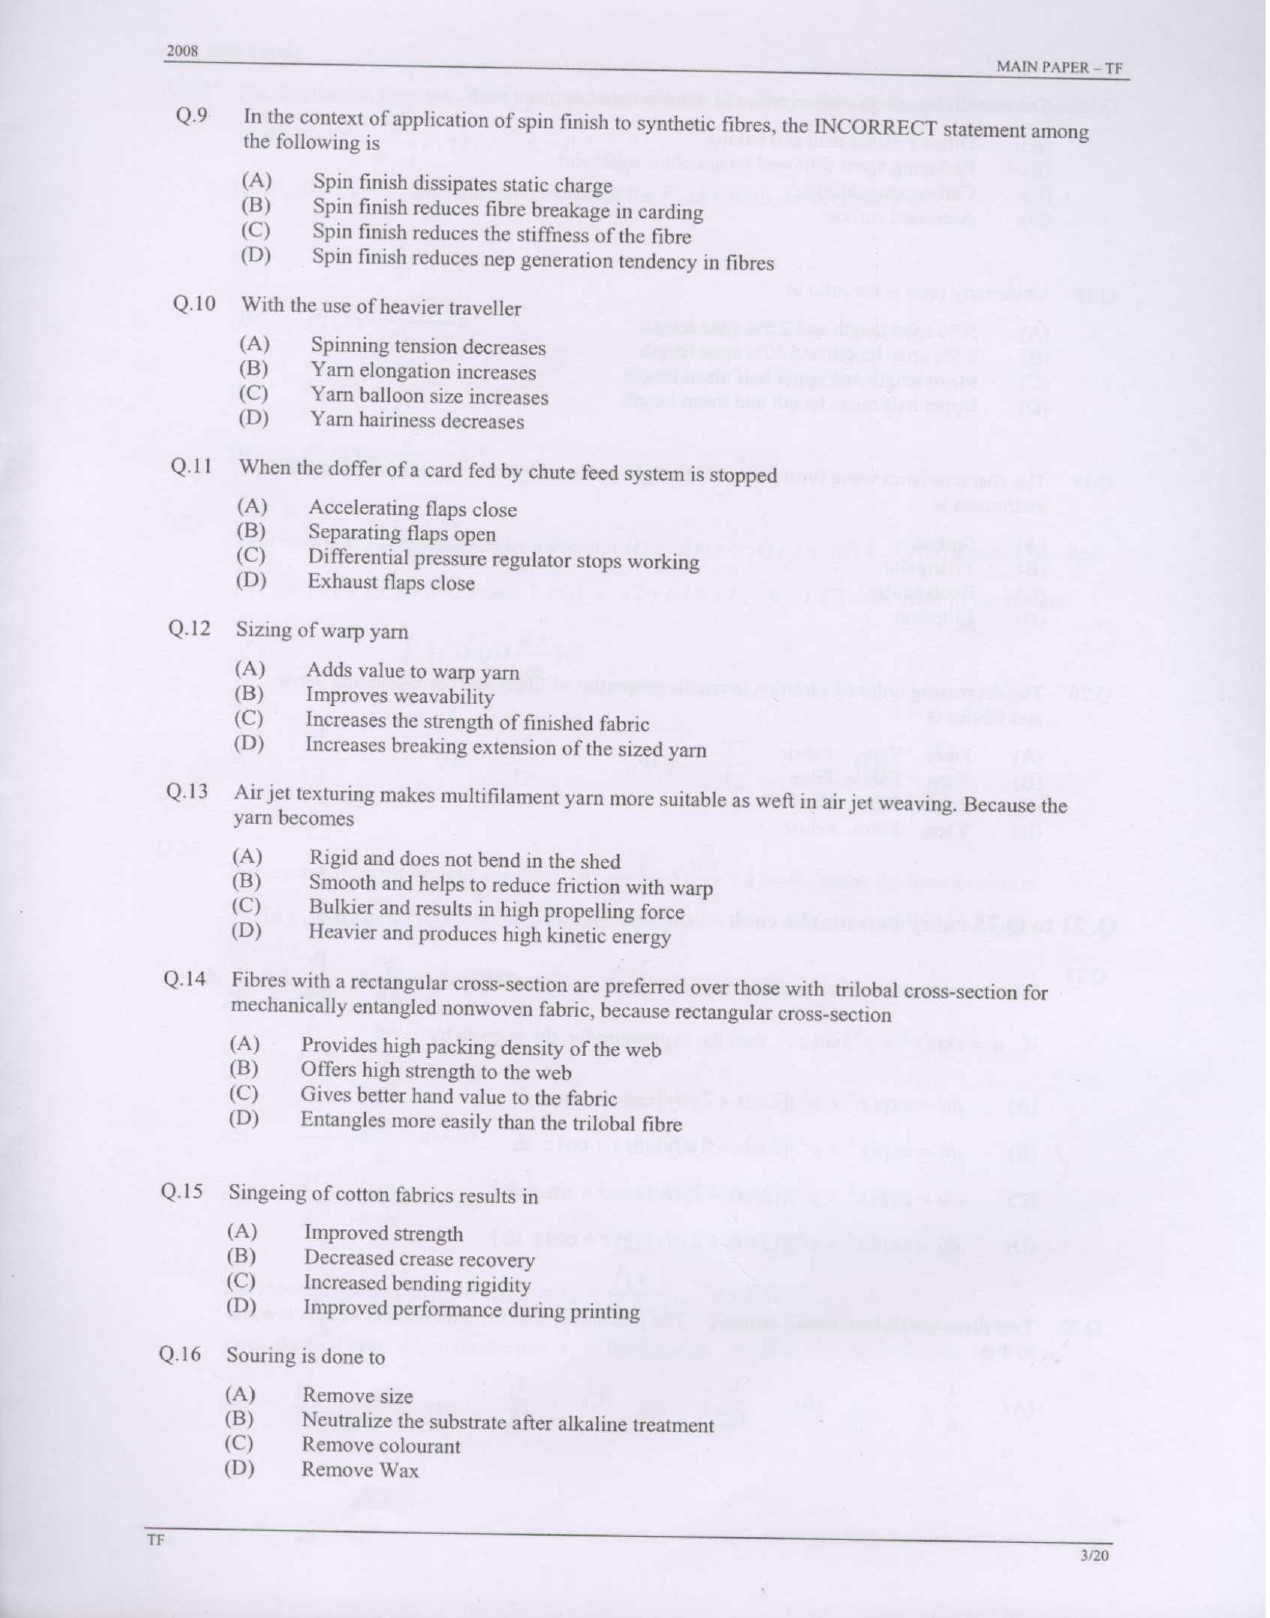 GATE Exam Question Paper 2008 Textile Engineering and Fibre Science 3